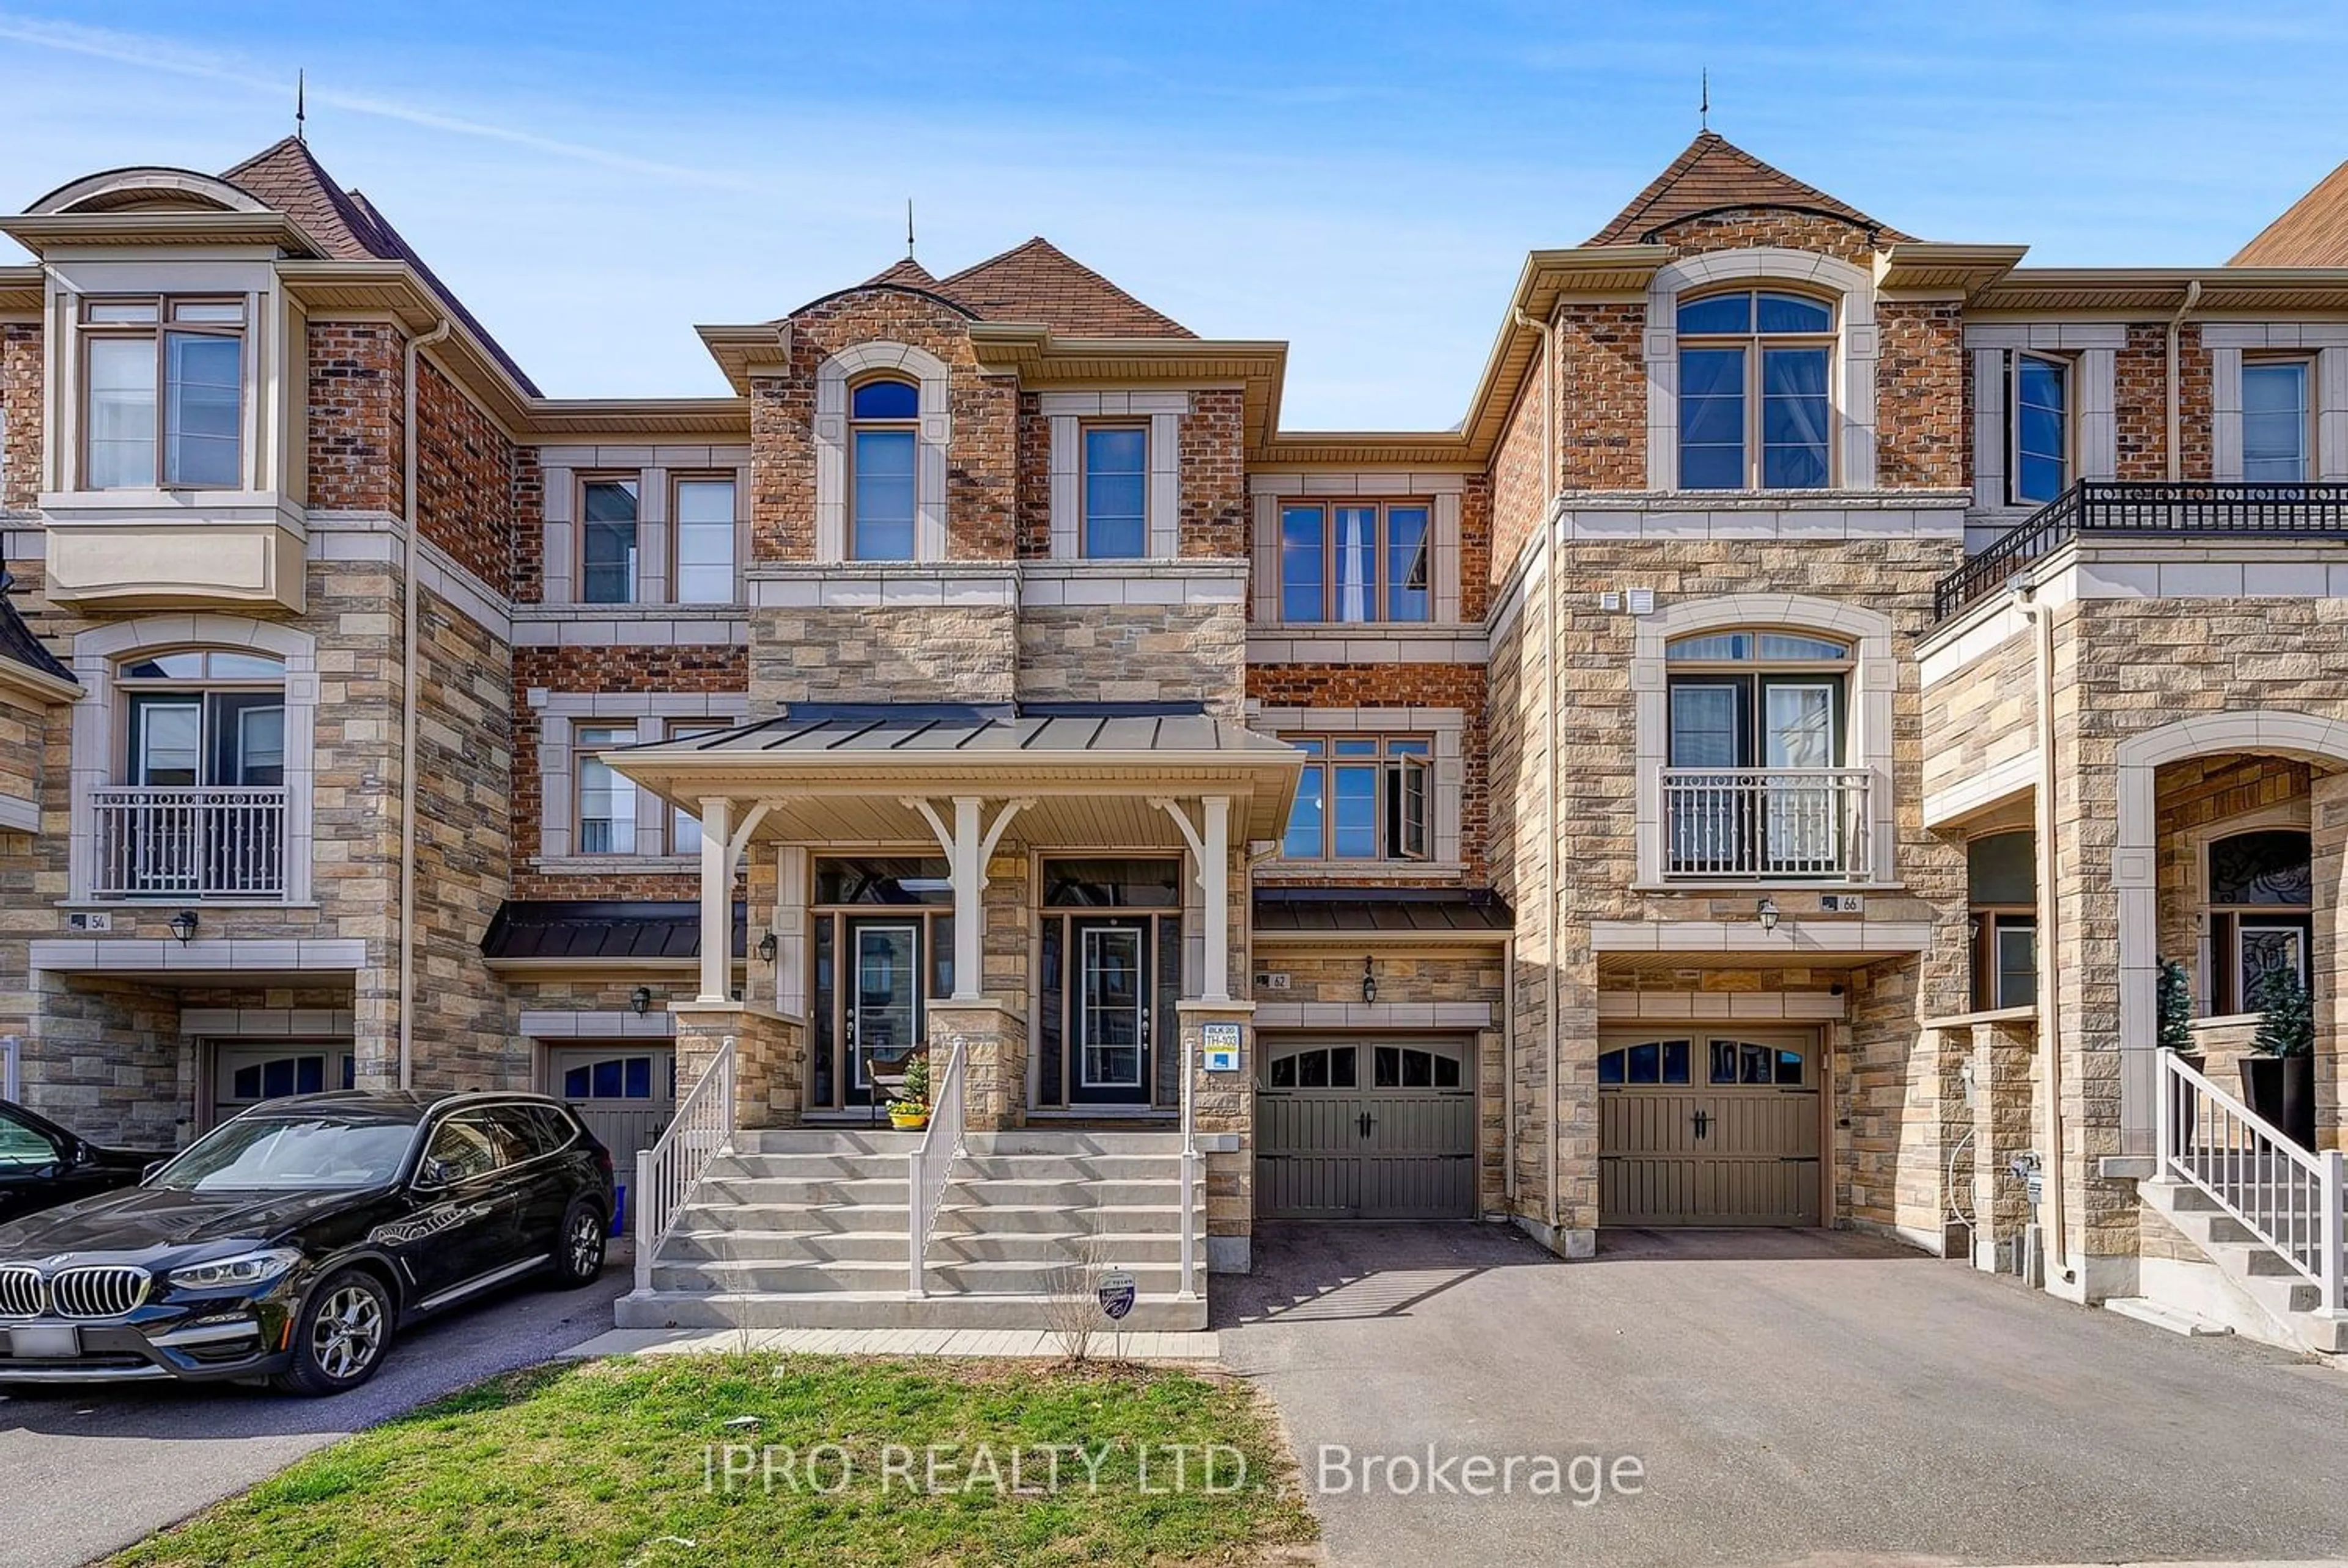 Home with brick exterior material for 62 Farooq Blvd, Vaughan Ontario L4H 4P3